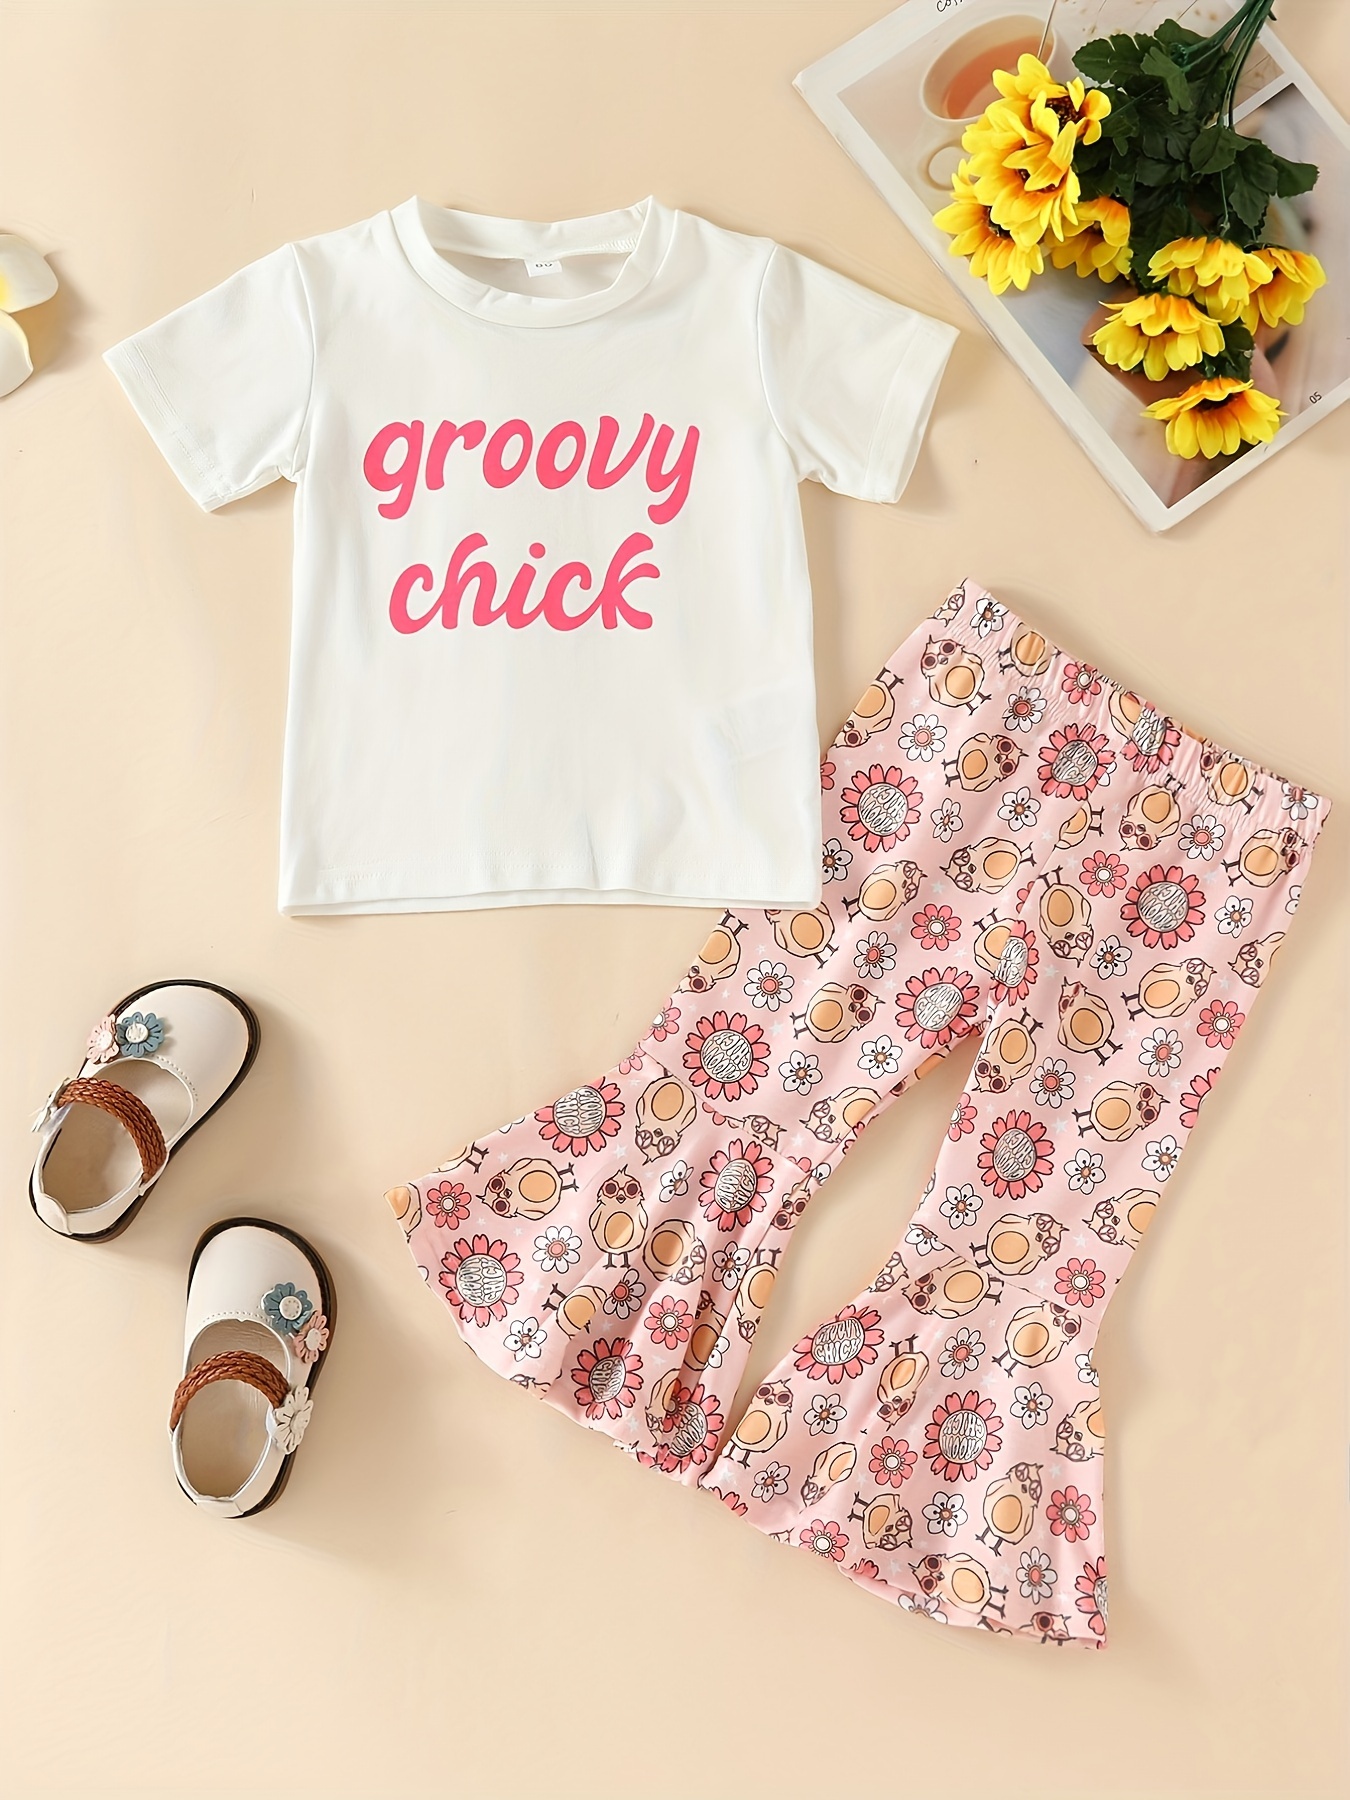 Groovy Camisole and Pants Set Pajamas